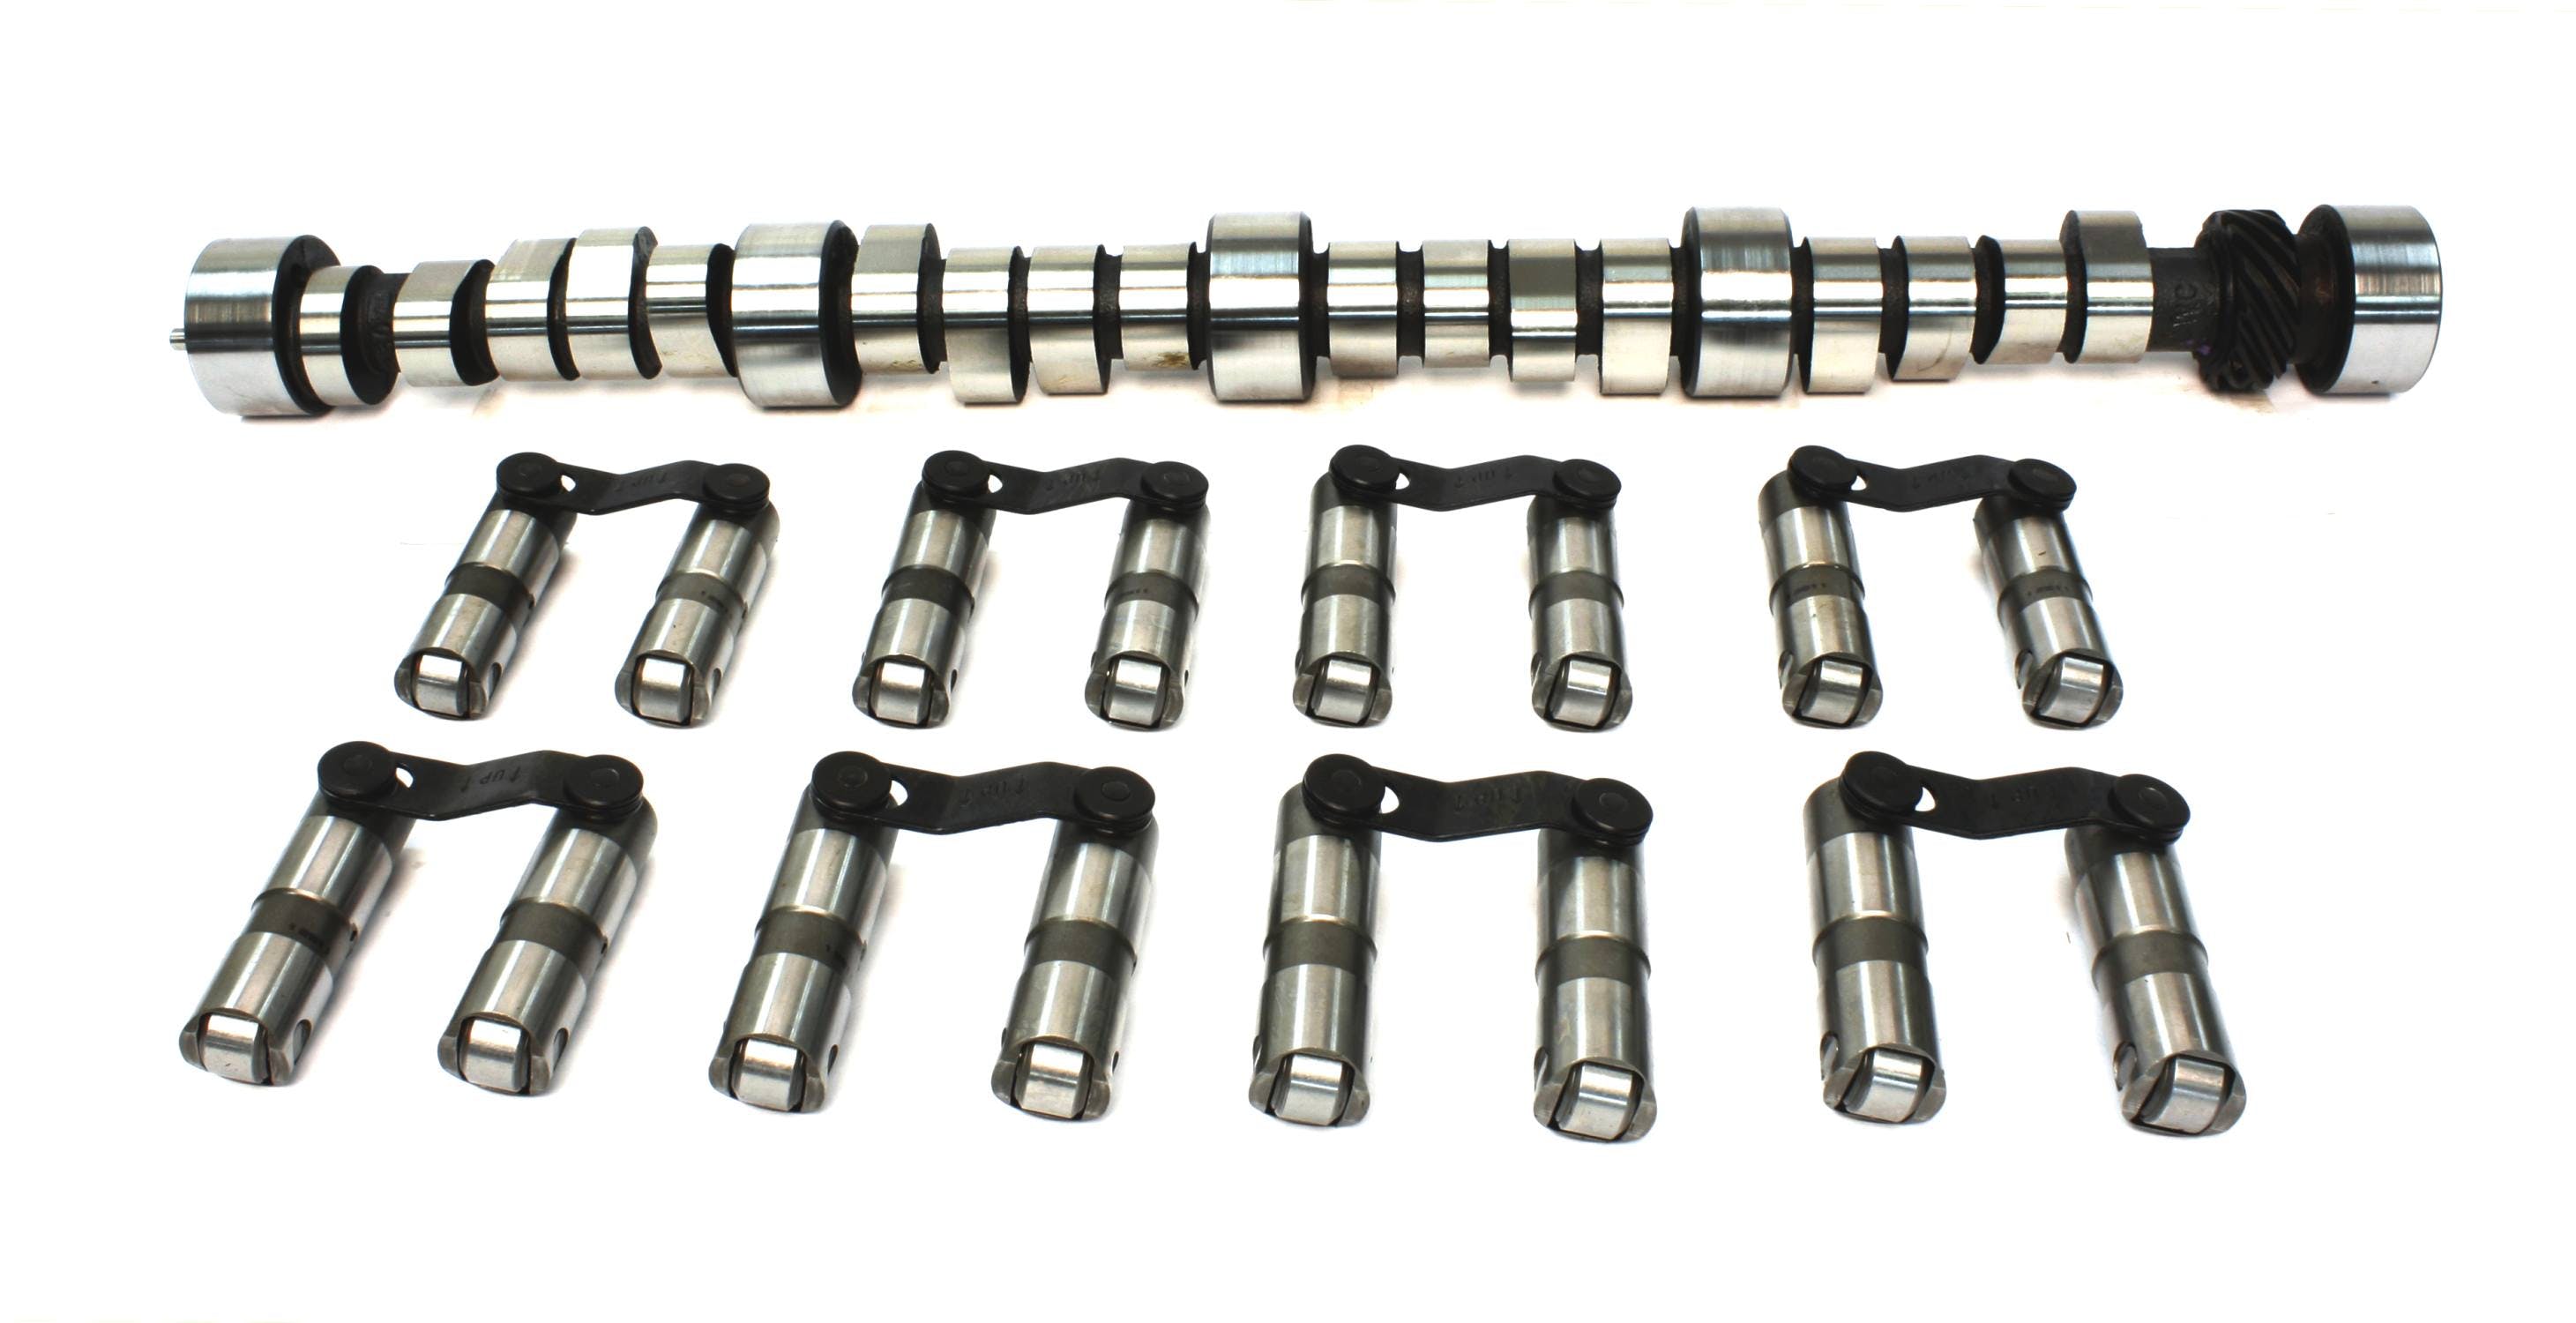 Competition Cams CL11-601-8 MUTHA THUMPR 235/249 HYD ROLLER CAM/LIFTER KIT CHEVY BIG BLOCK 396-454